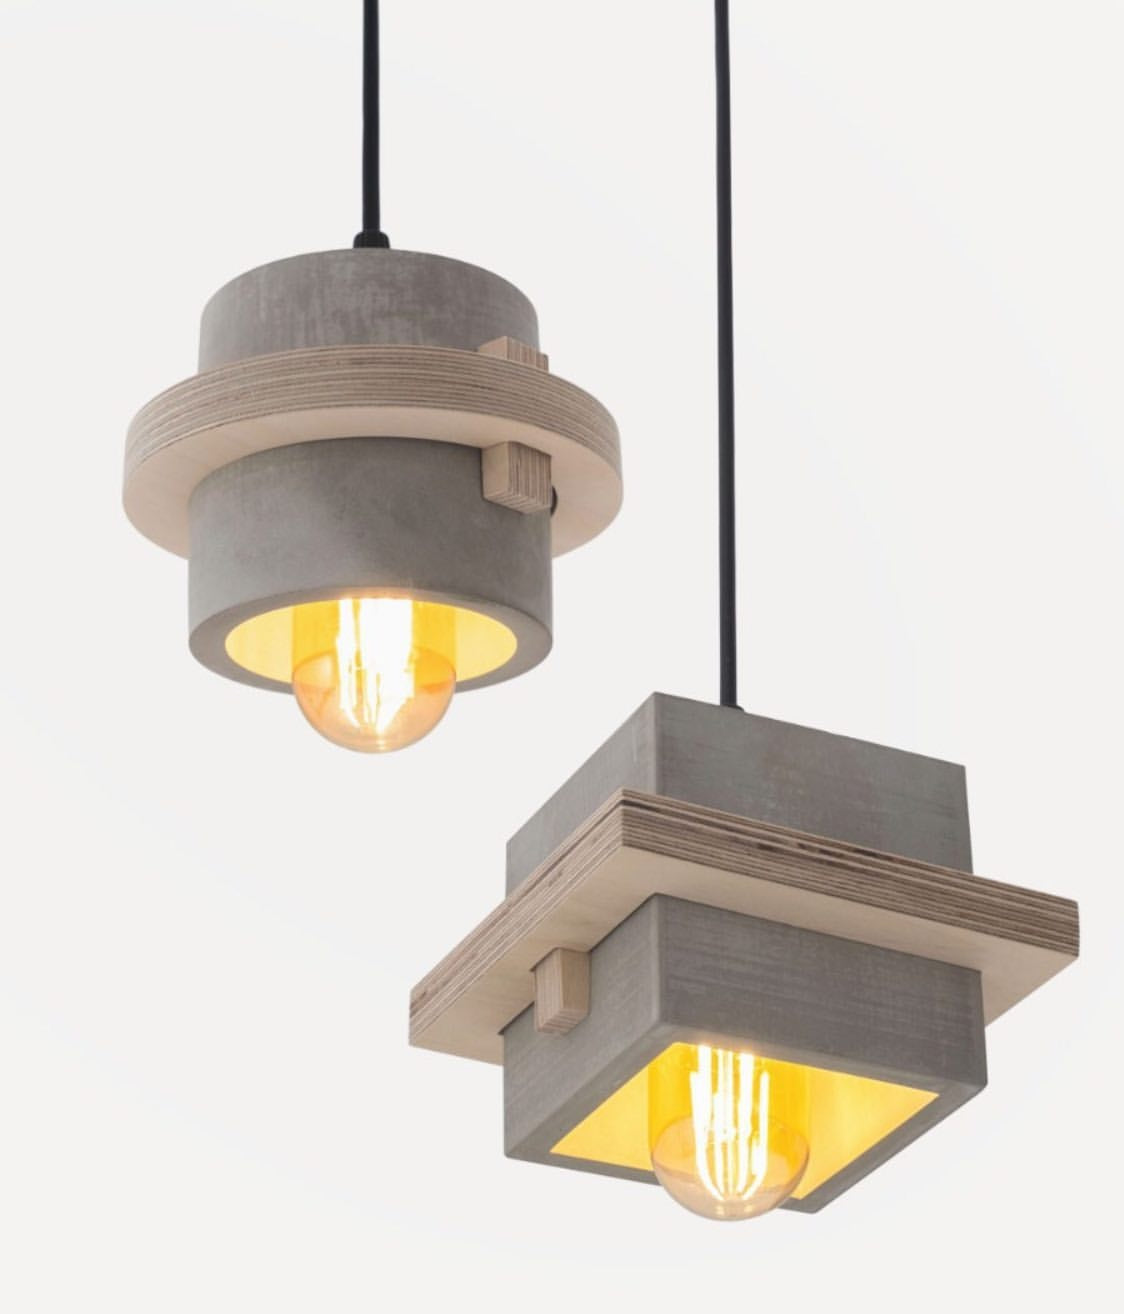 Square Wood and Concrete Ceiling Lighting